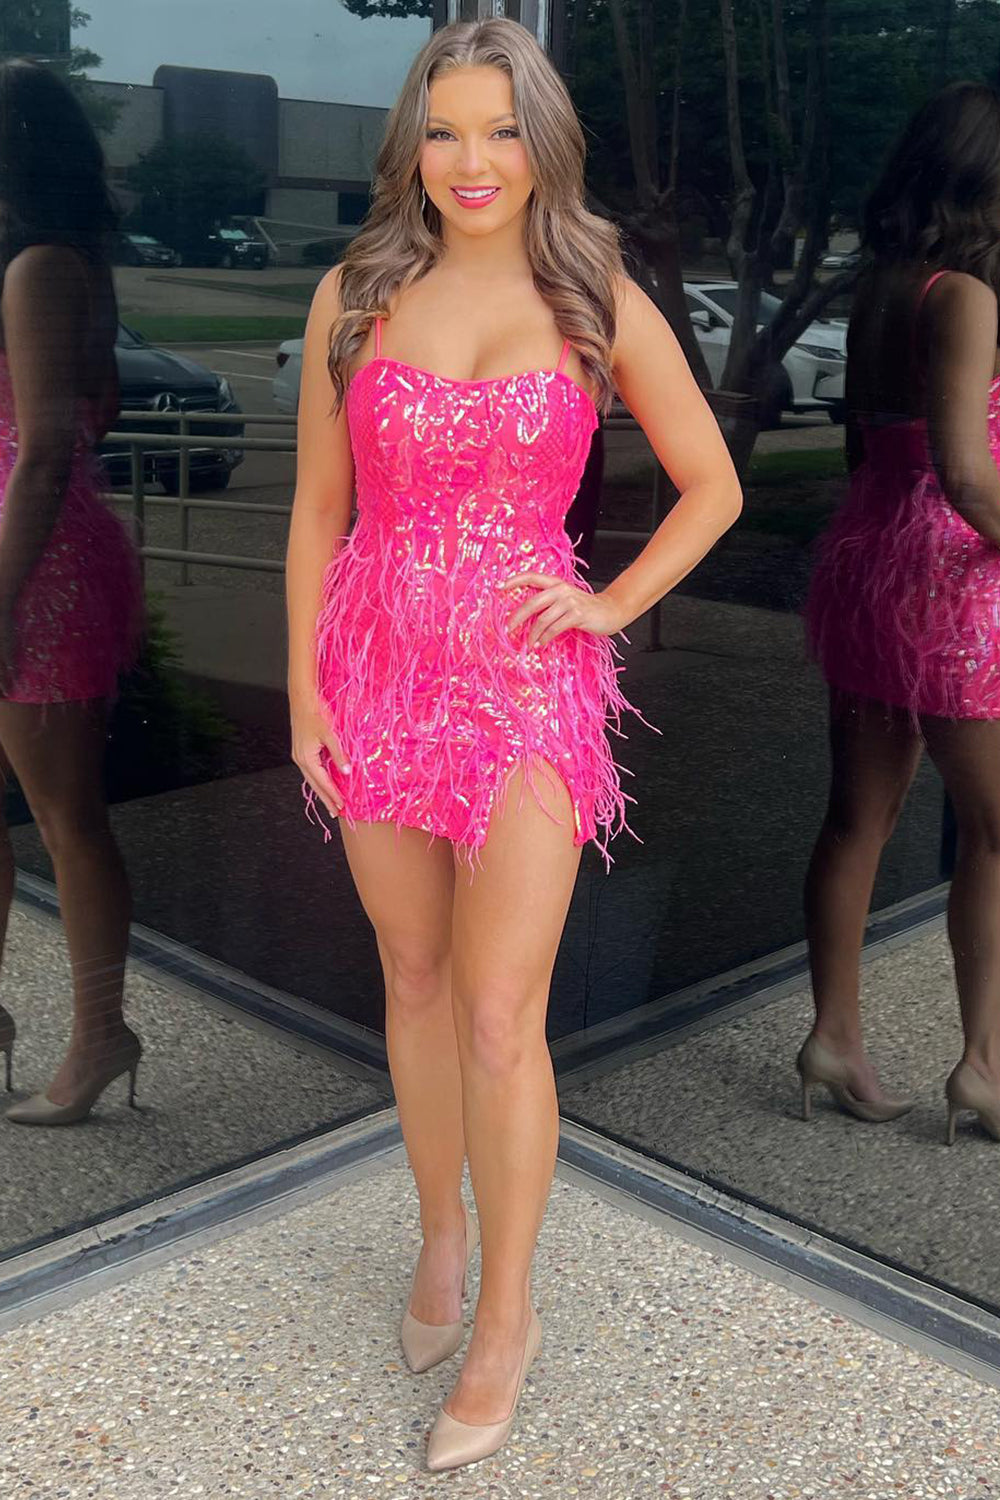 Sparkly Sheath Spaghetti Straps Hot Pink Short Homecoming Dress with Feather